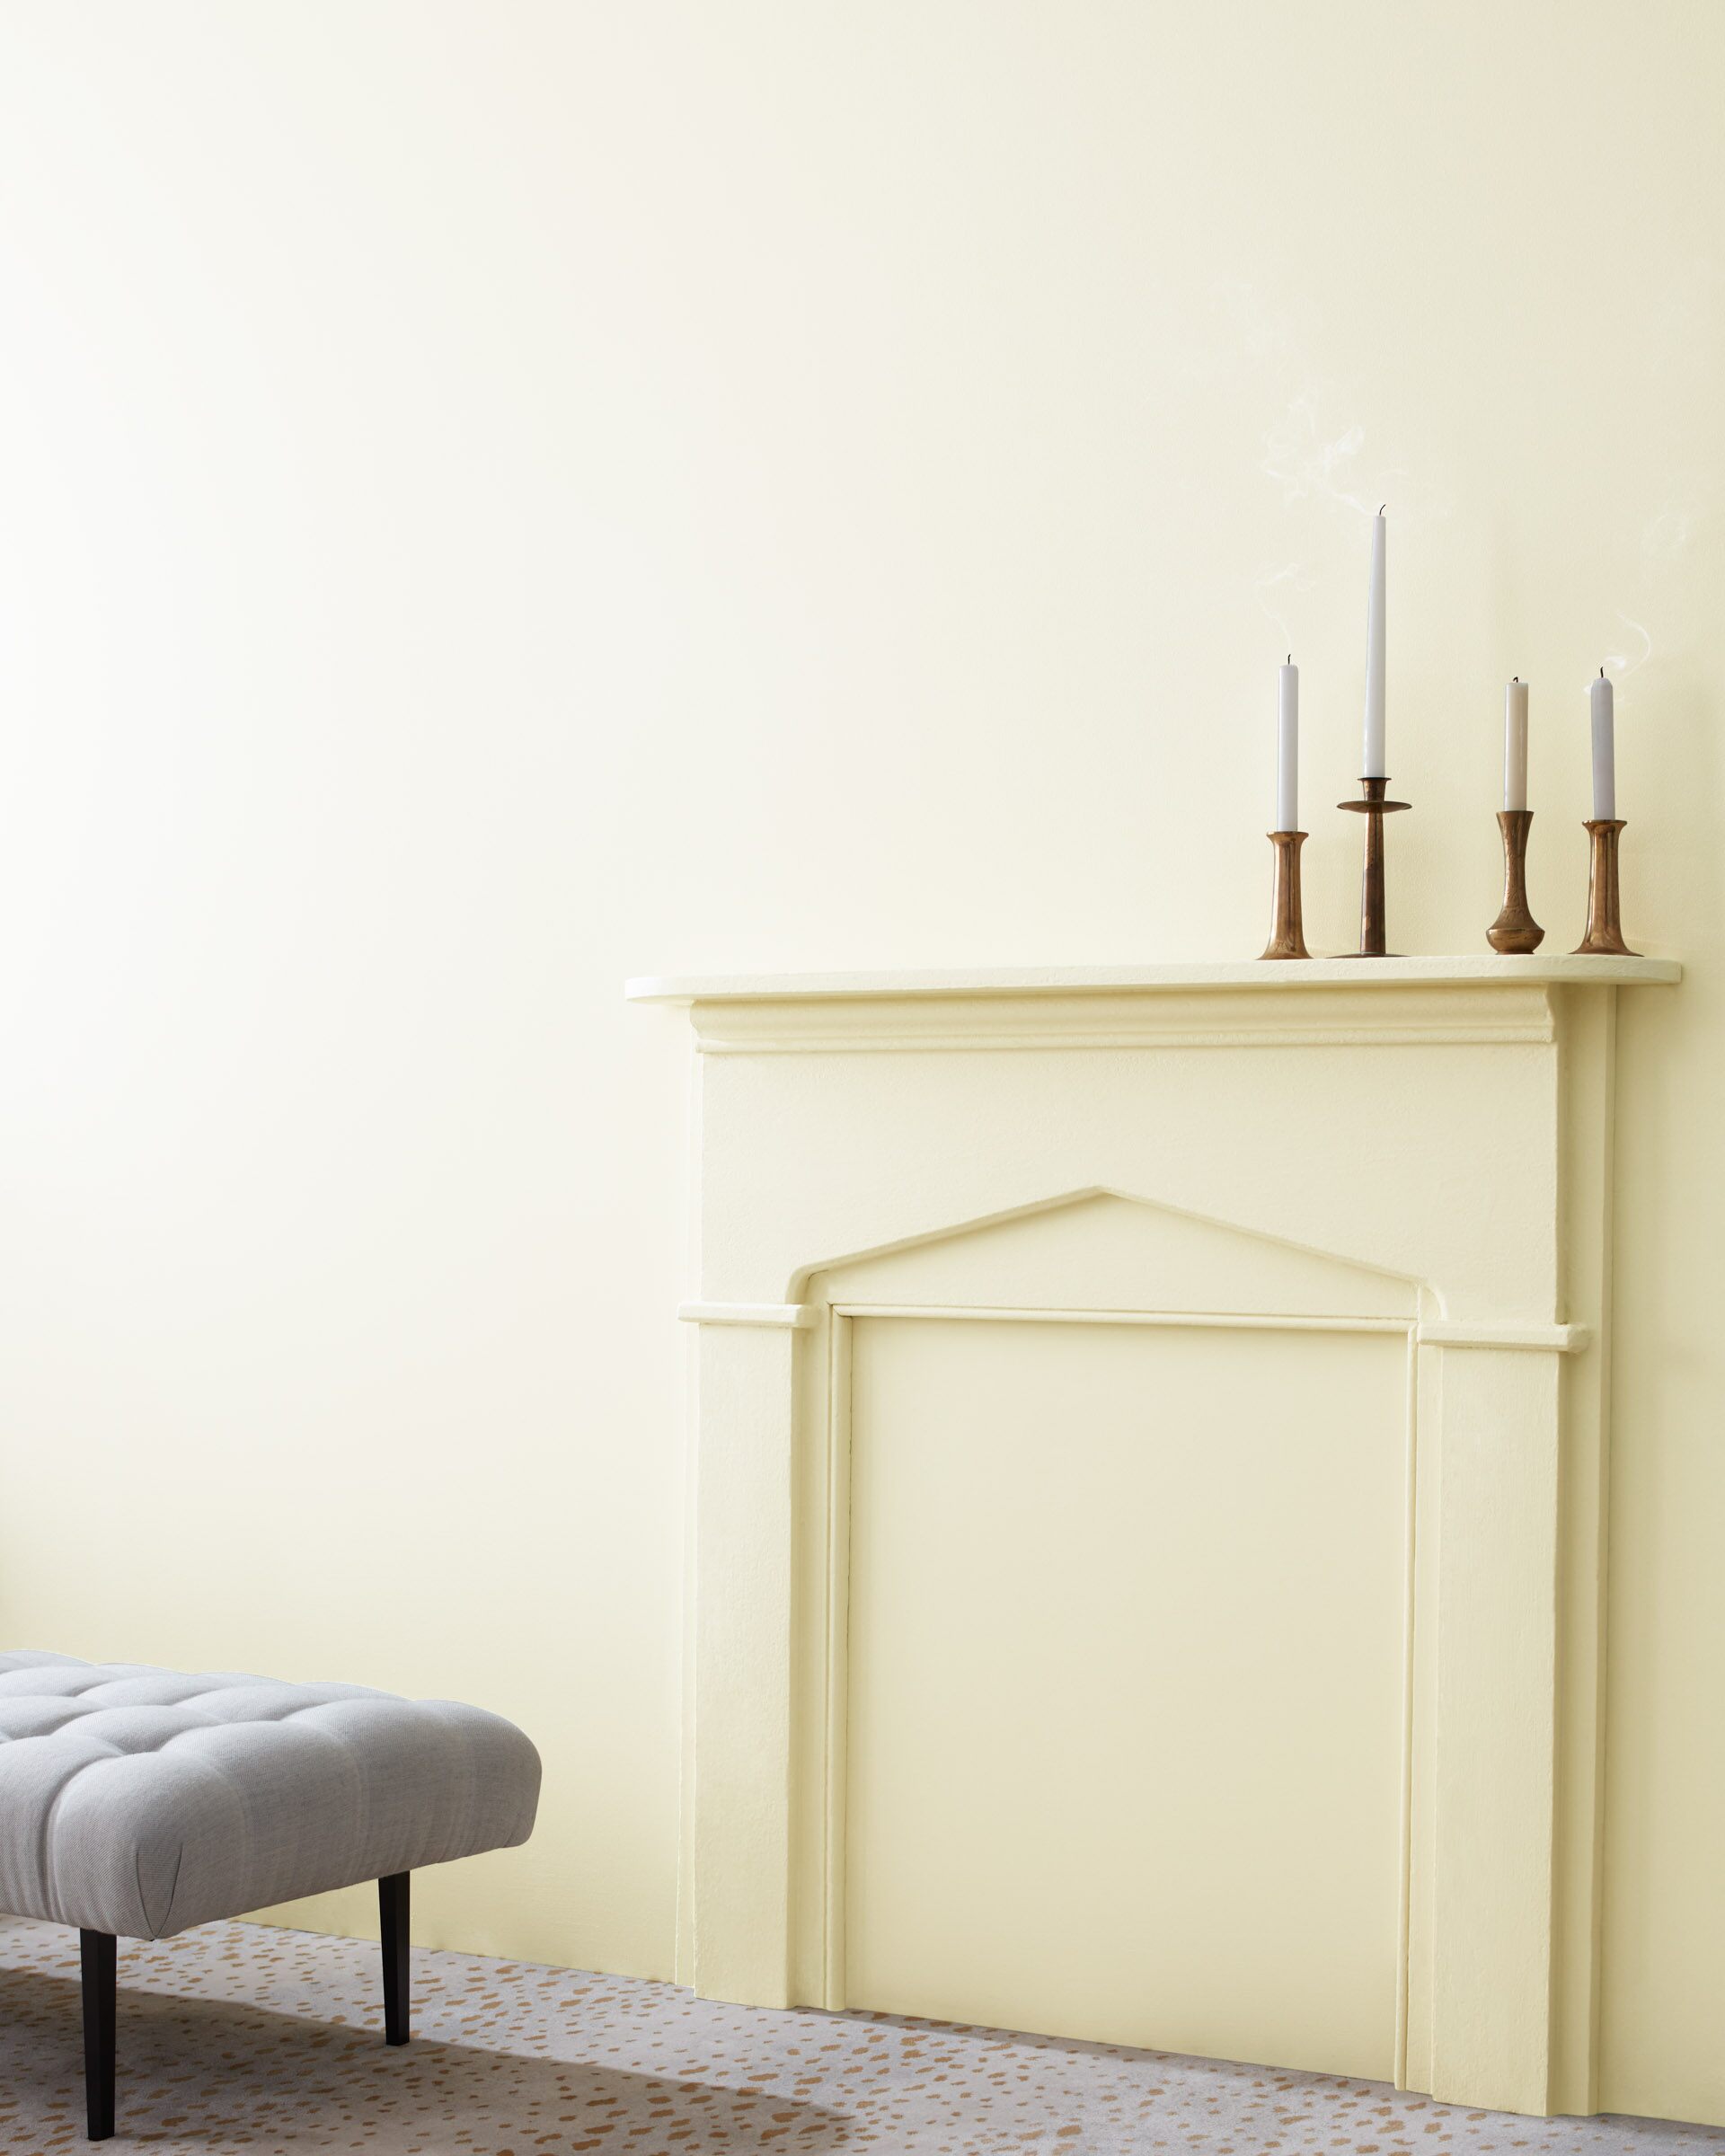 Wall with mantle and candle sticks painted in Cloud White by Benjamin Moore.